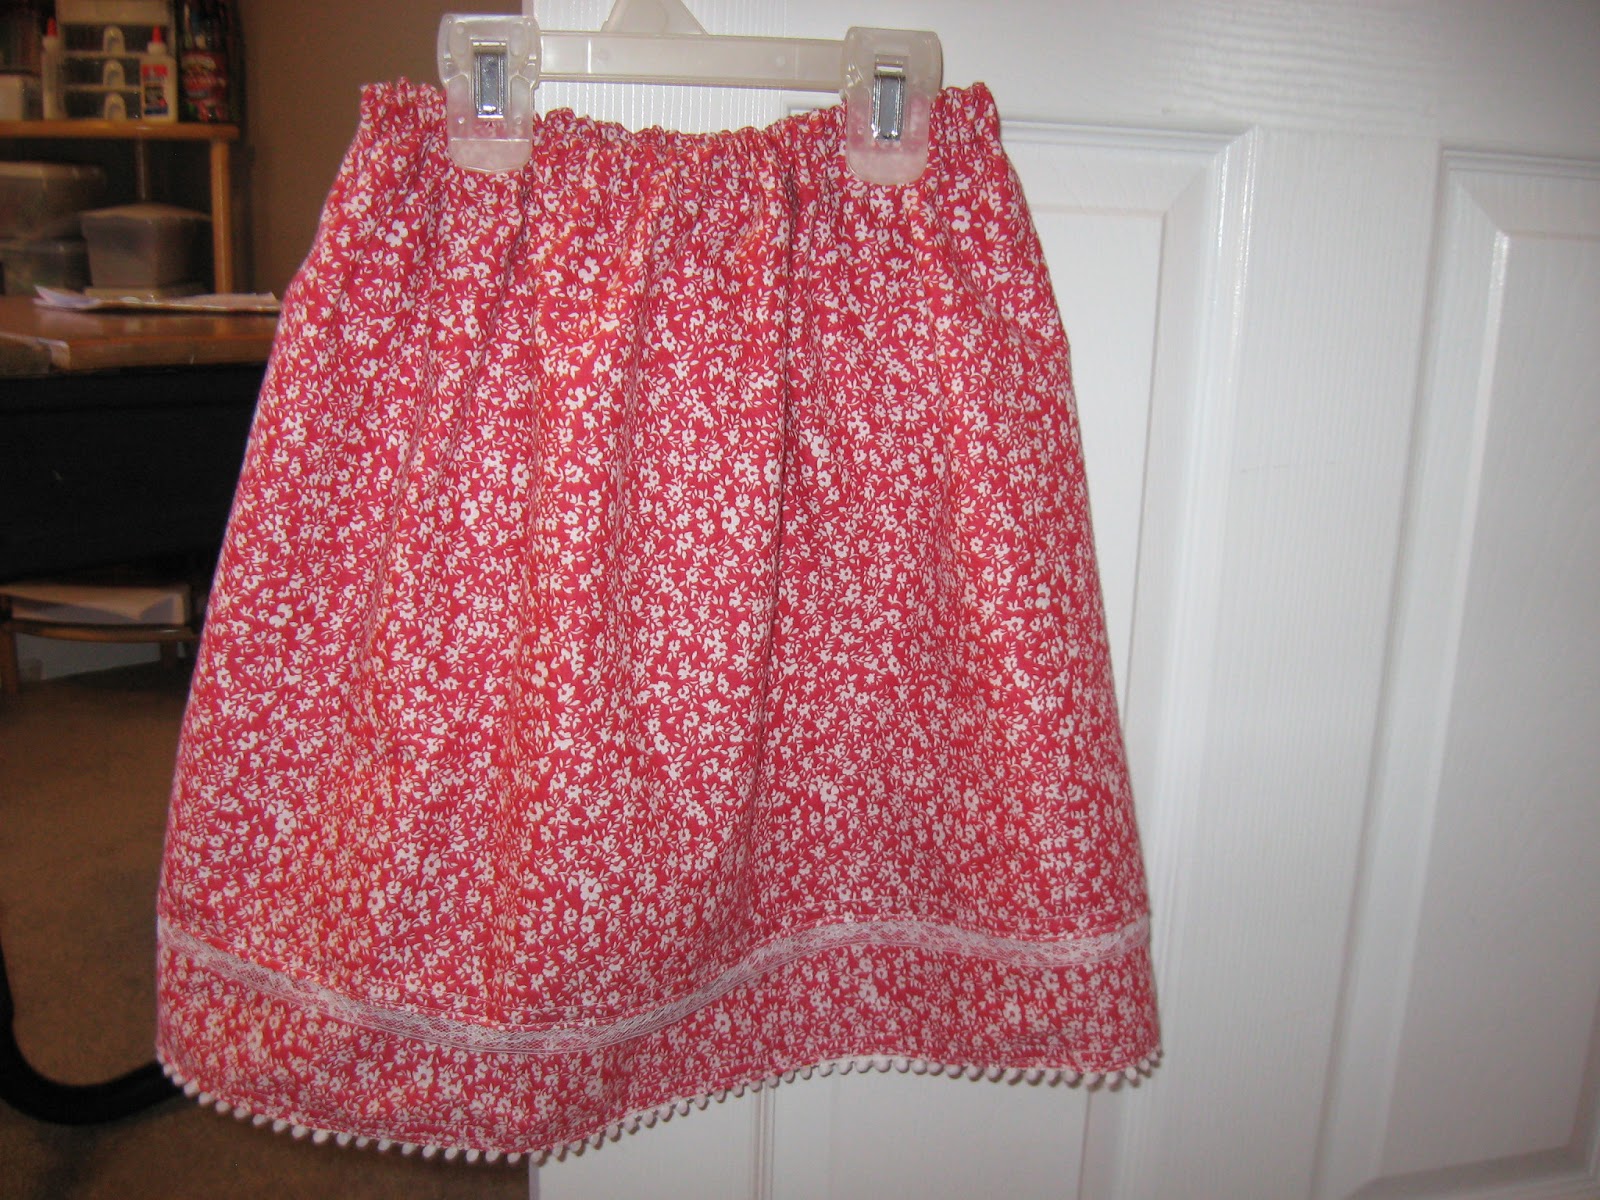 I sewed my first skirt!